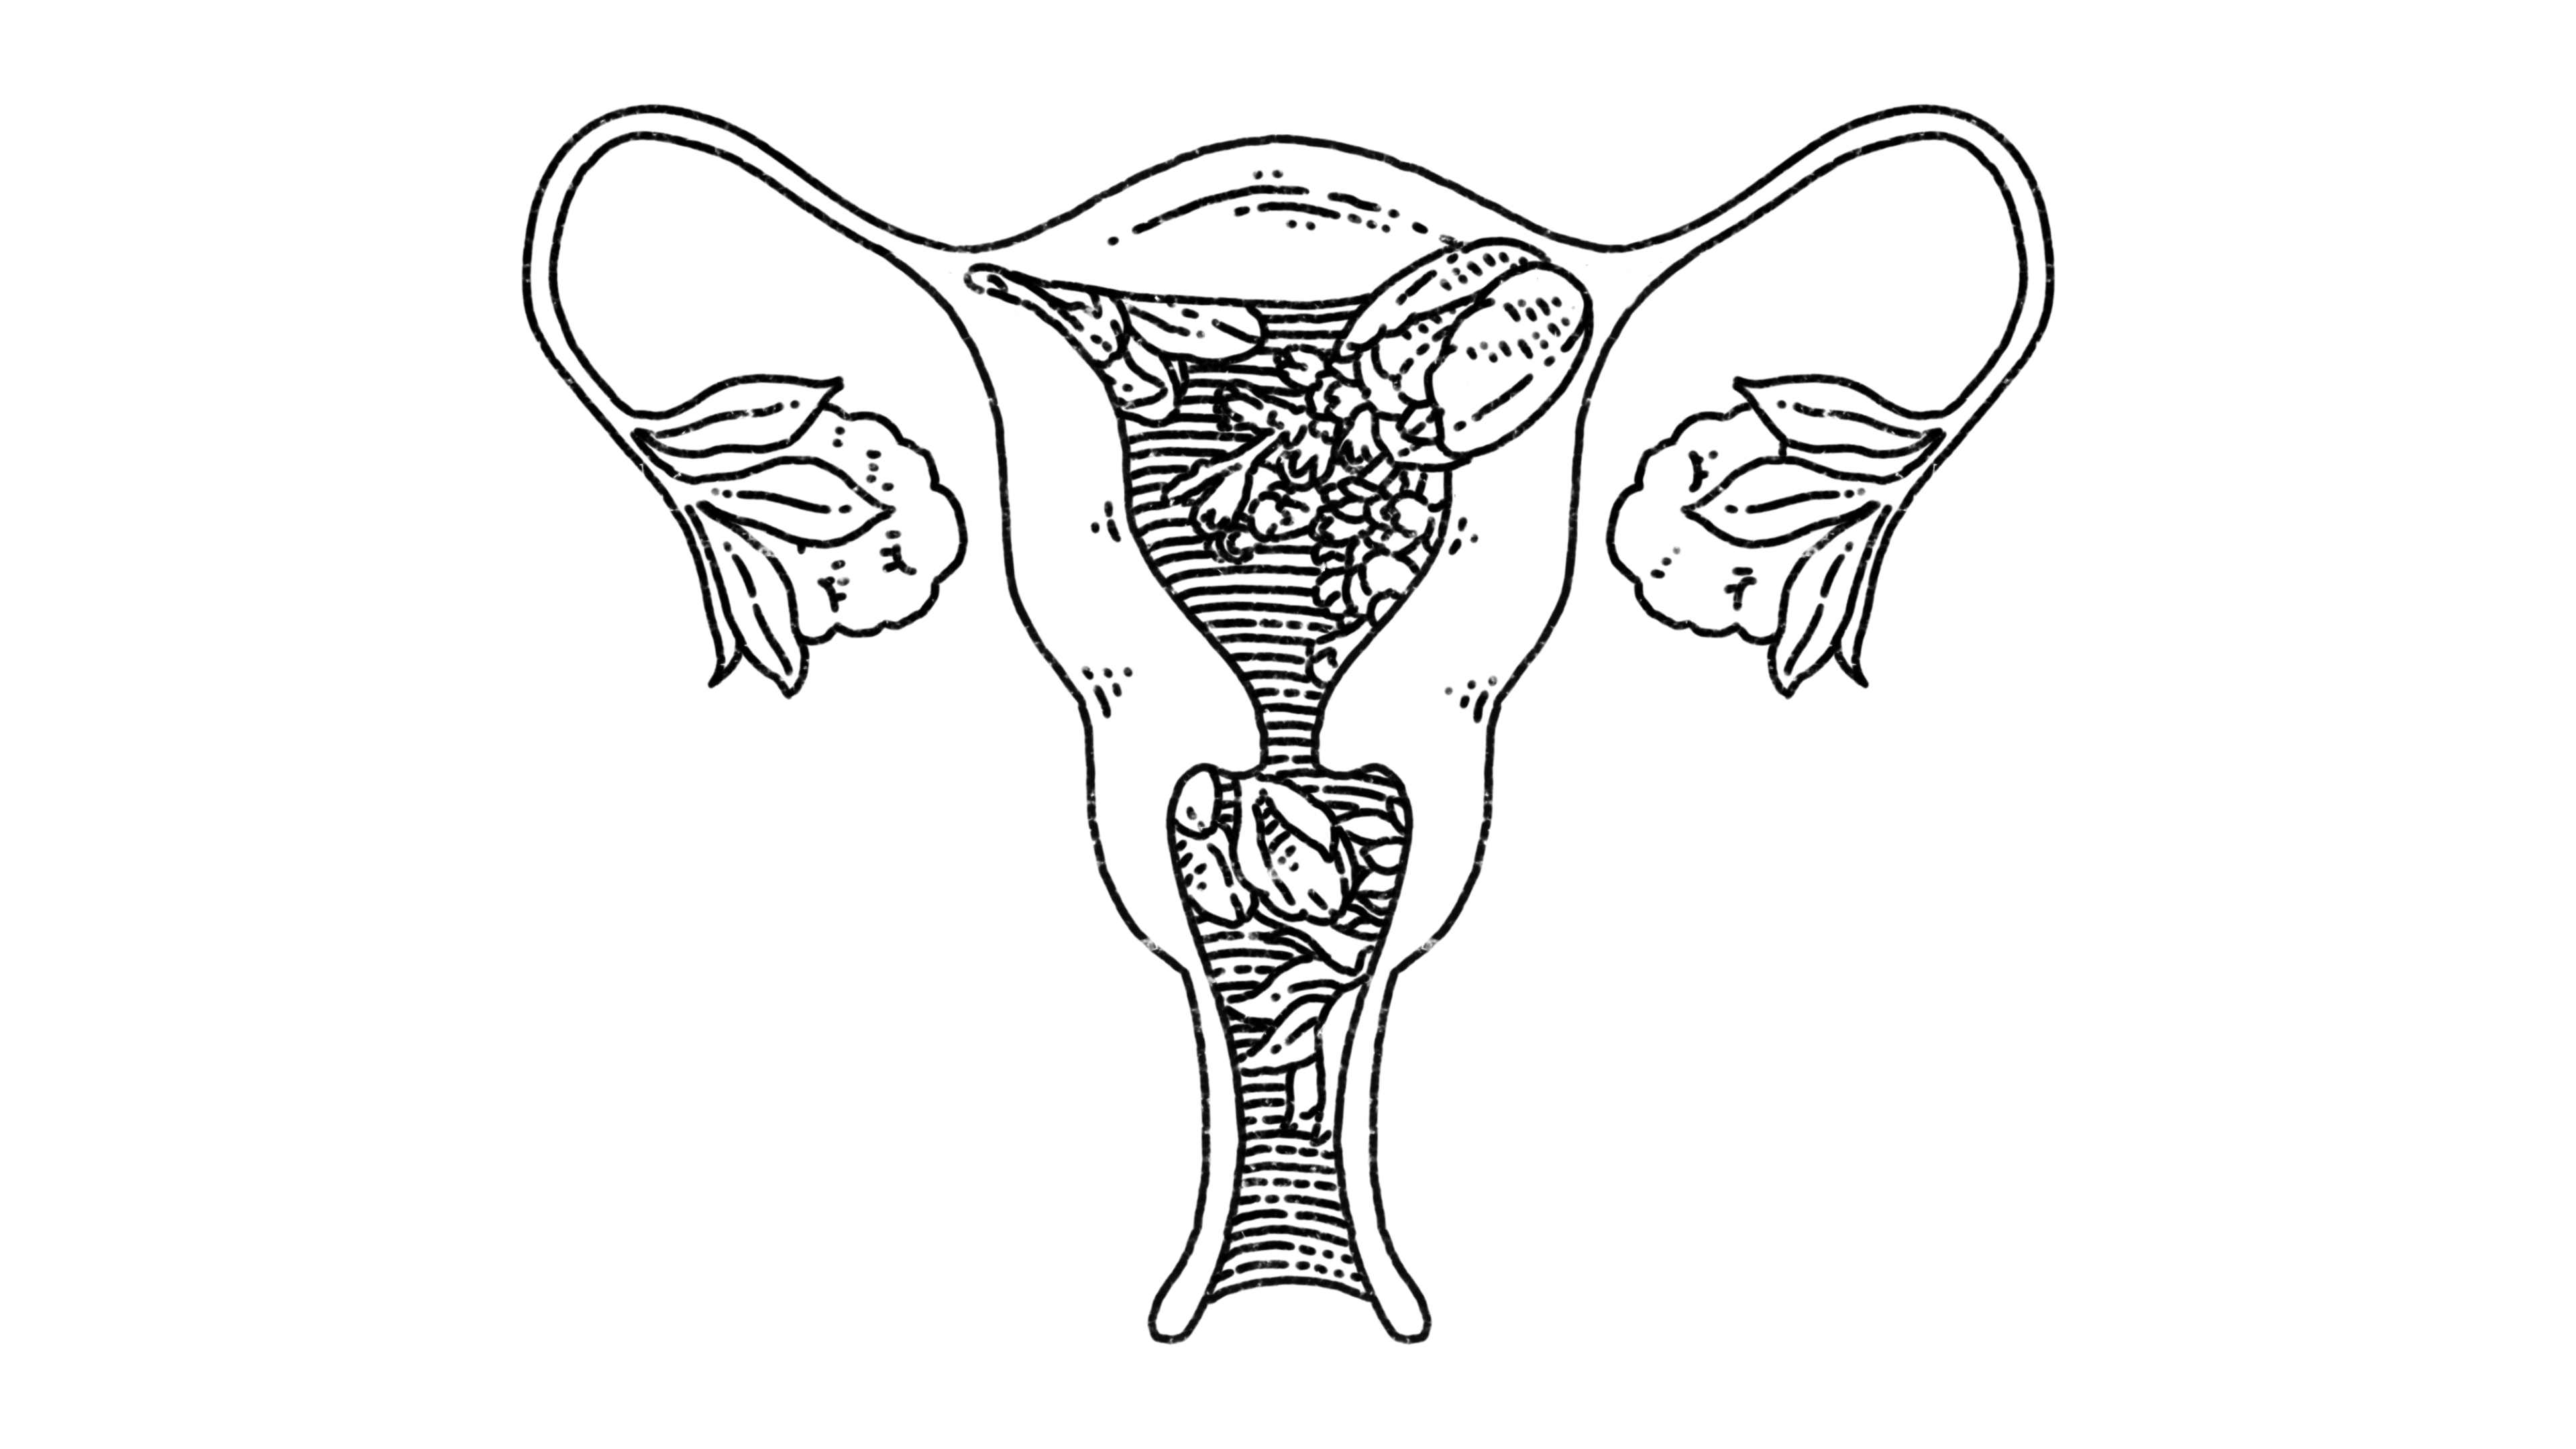 a reproductive system of someone assigned female at birth with flowers blooming inside